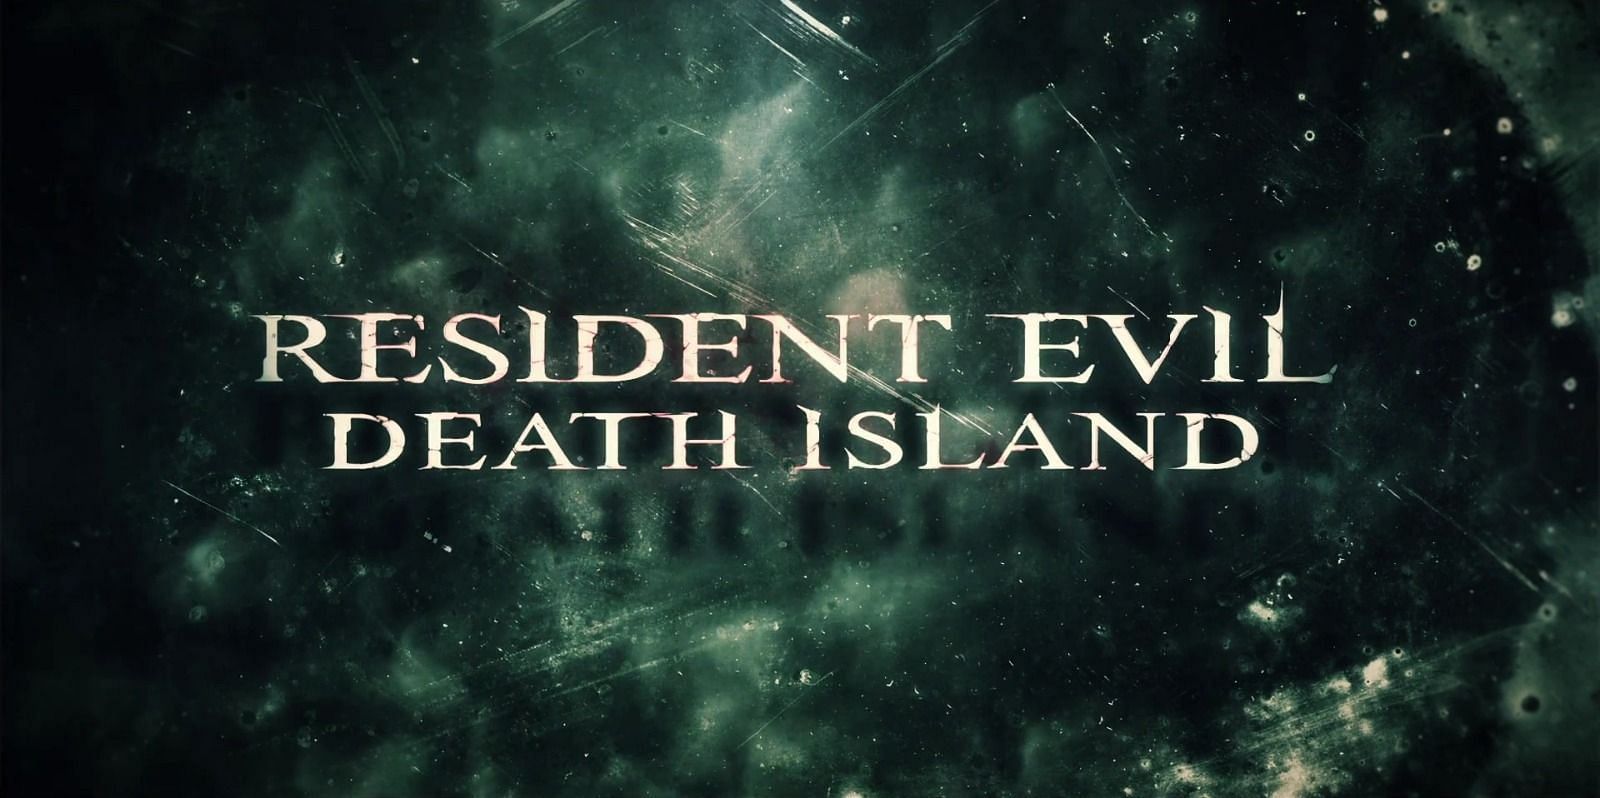 Resident Evil: Death Island is scheduled to be released this summer. (Image via Sony Pictures)